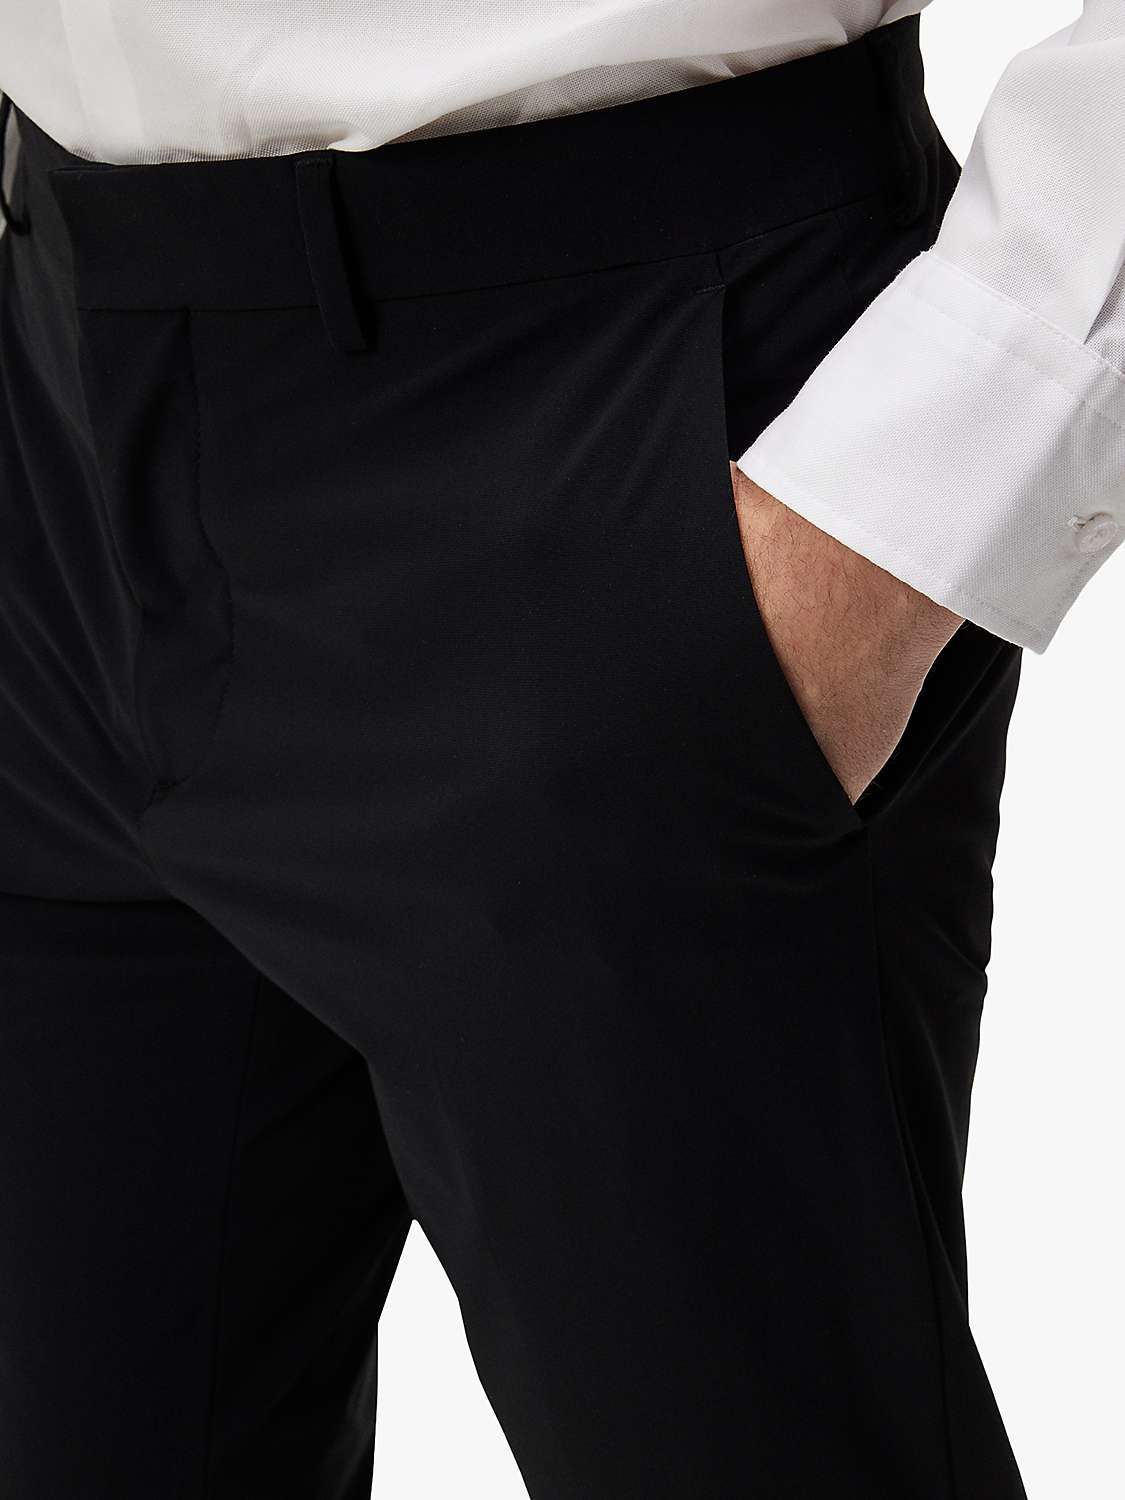 Buy J.Lindeberg Lois Four Way Stretch Trousers, Black Online at johnlewis.com